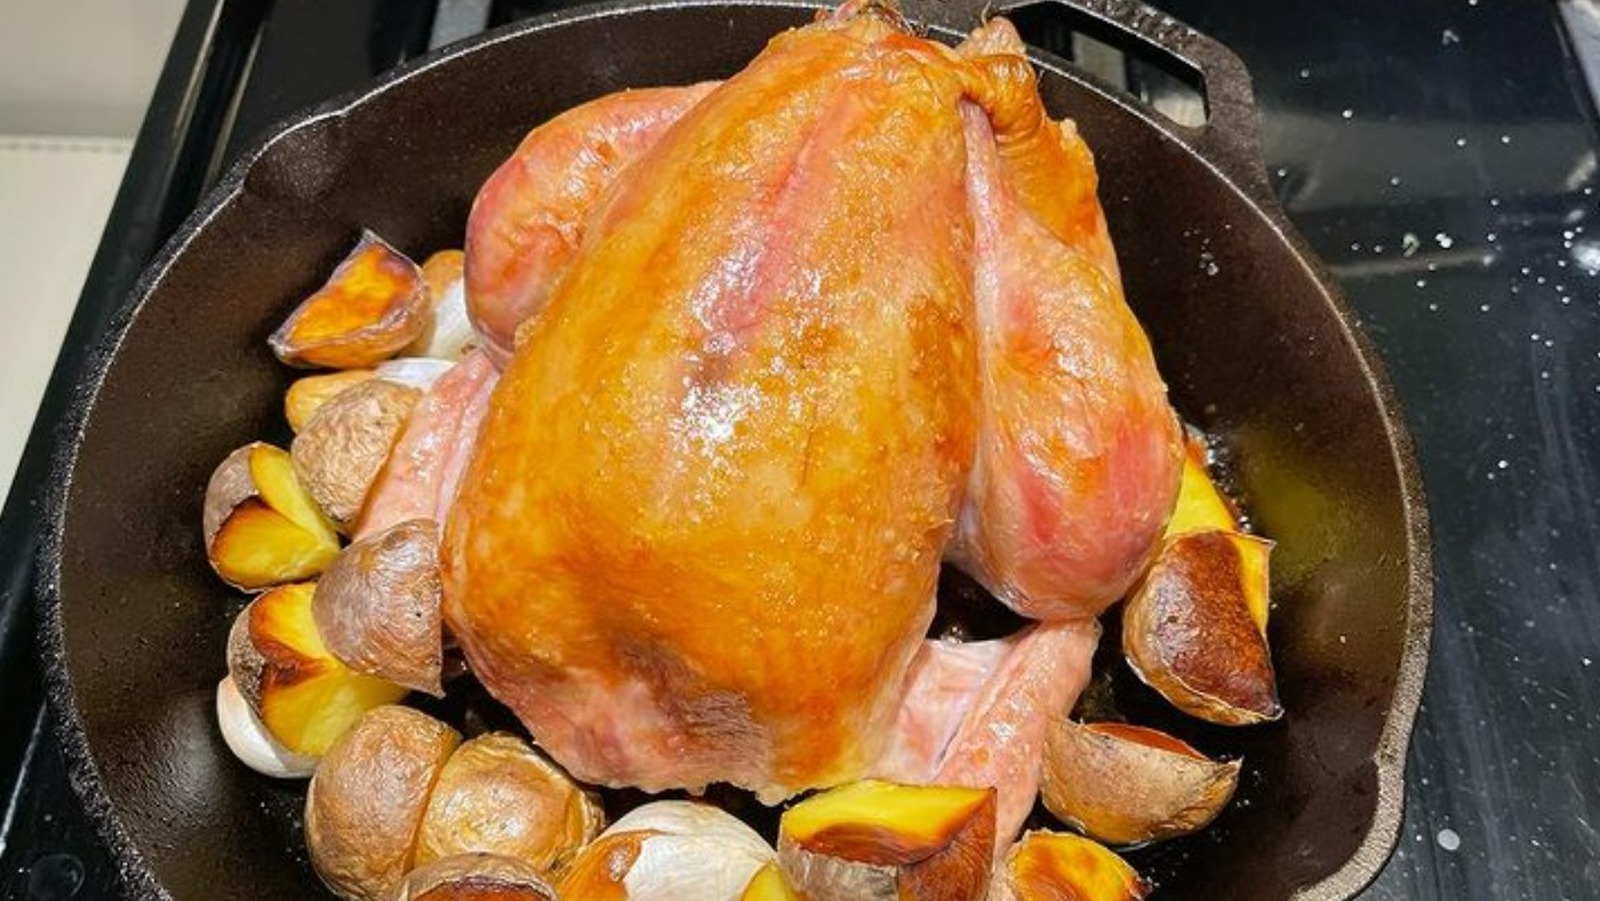 https://www.mashed.com/img/gallery/mistakes-everyone-makes-when-roasting-chicken/l-intro-1649859659.jpg